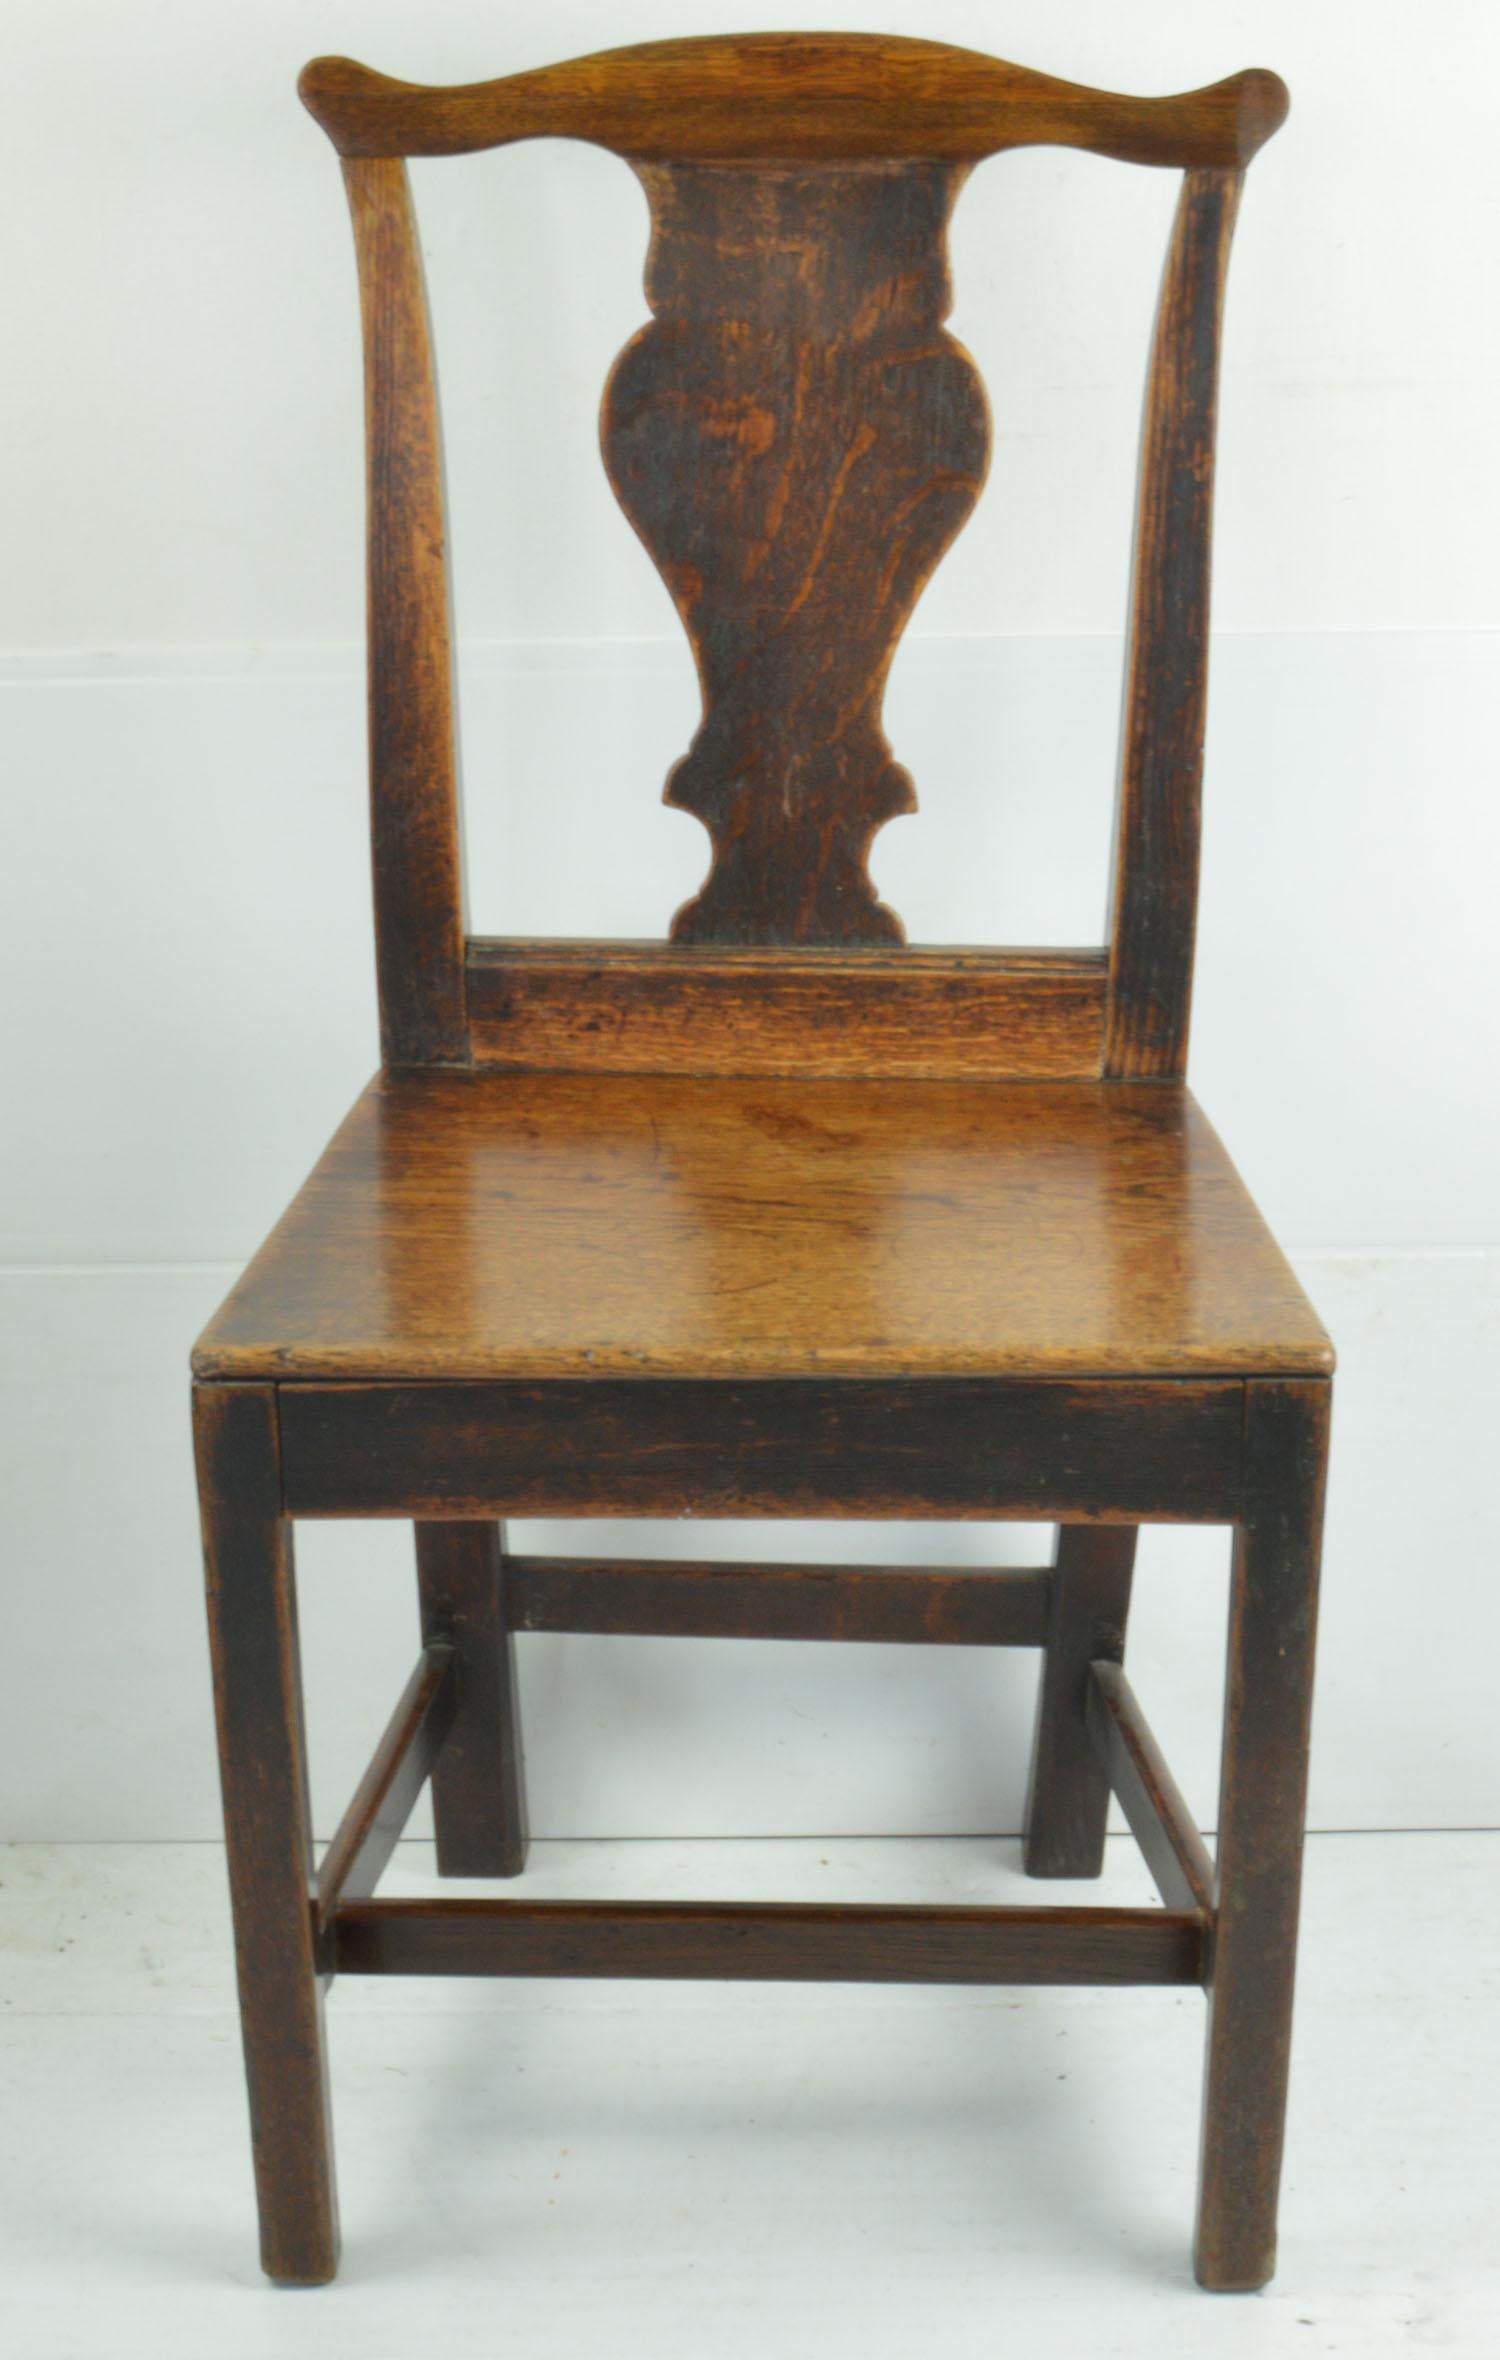 Folk Art Set of 4 Antique Oak Country Chippendale Chairs, English, 18th Century